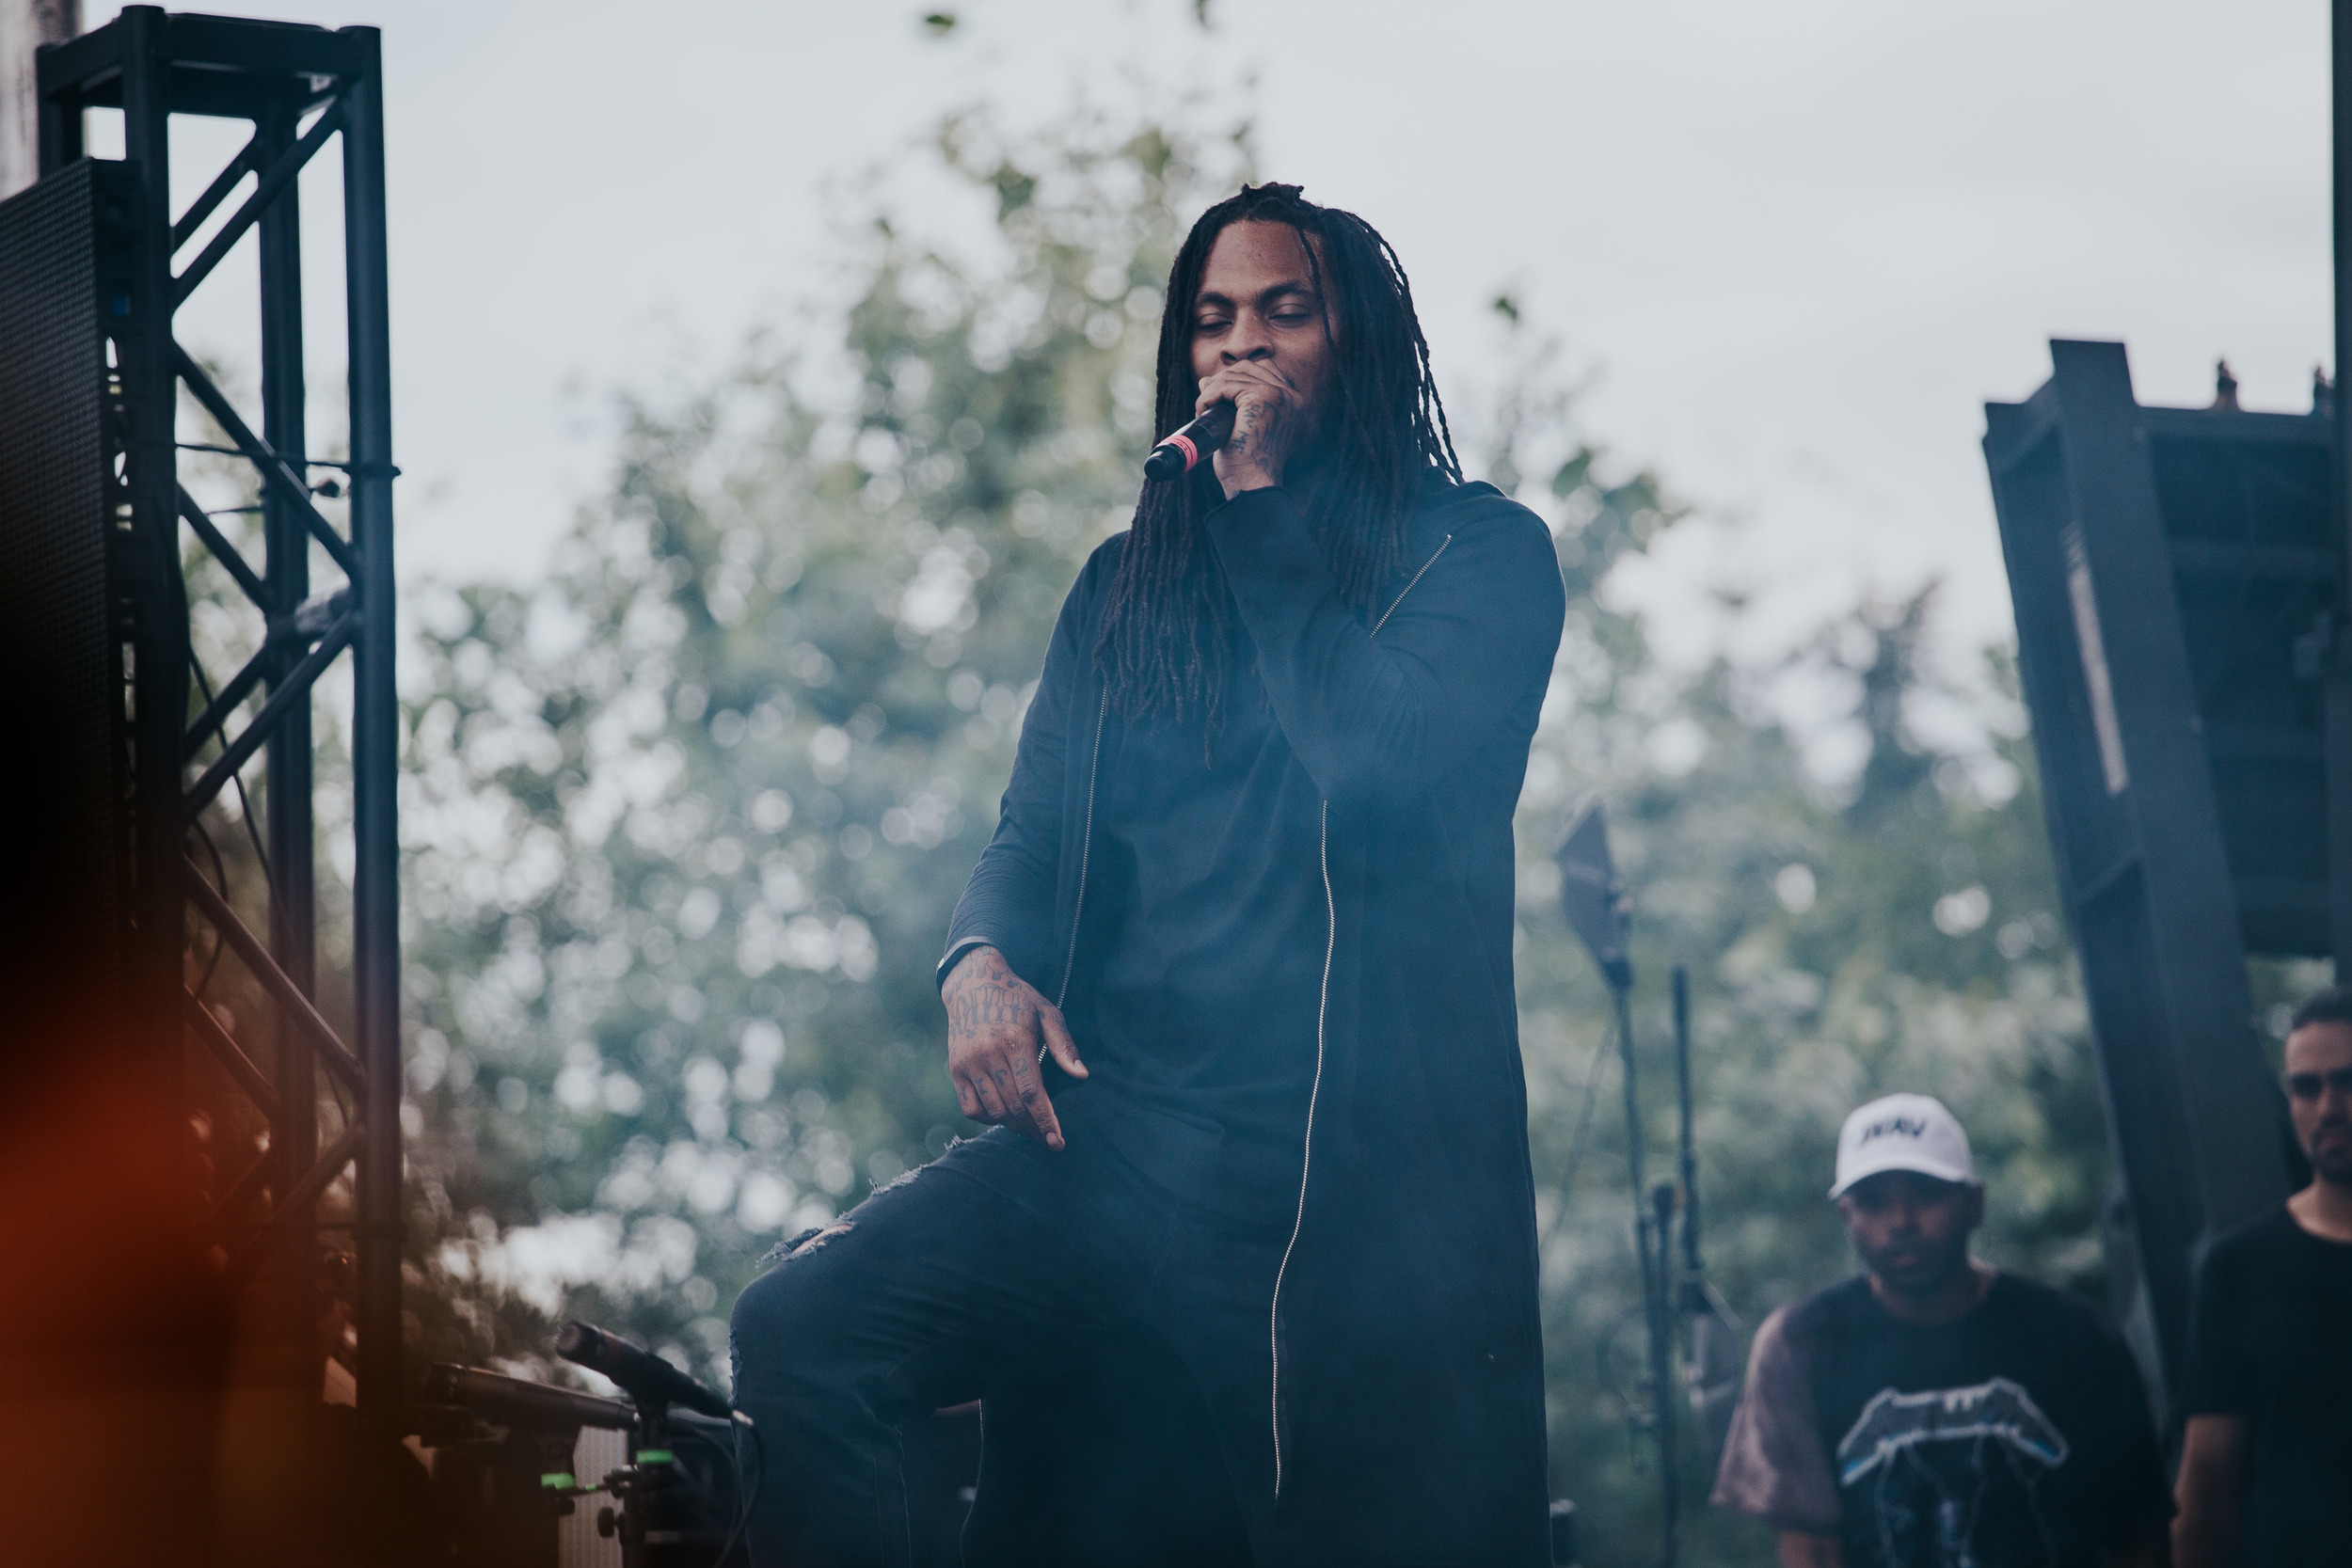 7_Belly_Waka_Flocka_Flame_Holland_Park_FVDED_Timothy_Nguyen_20160702 (7 of 13).jpg